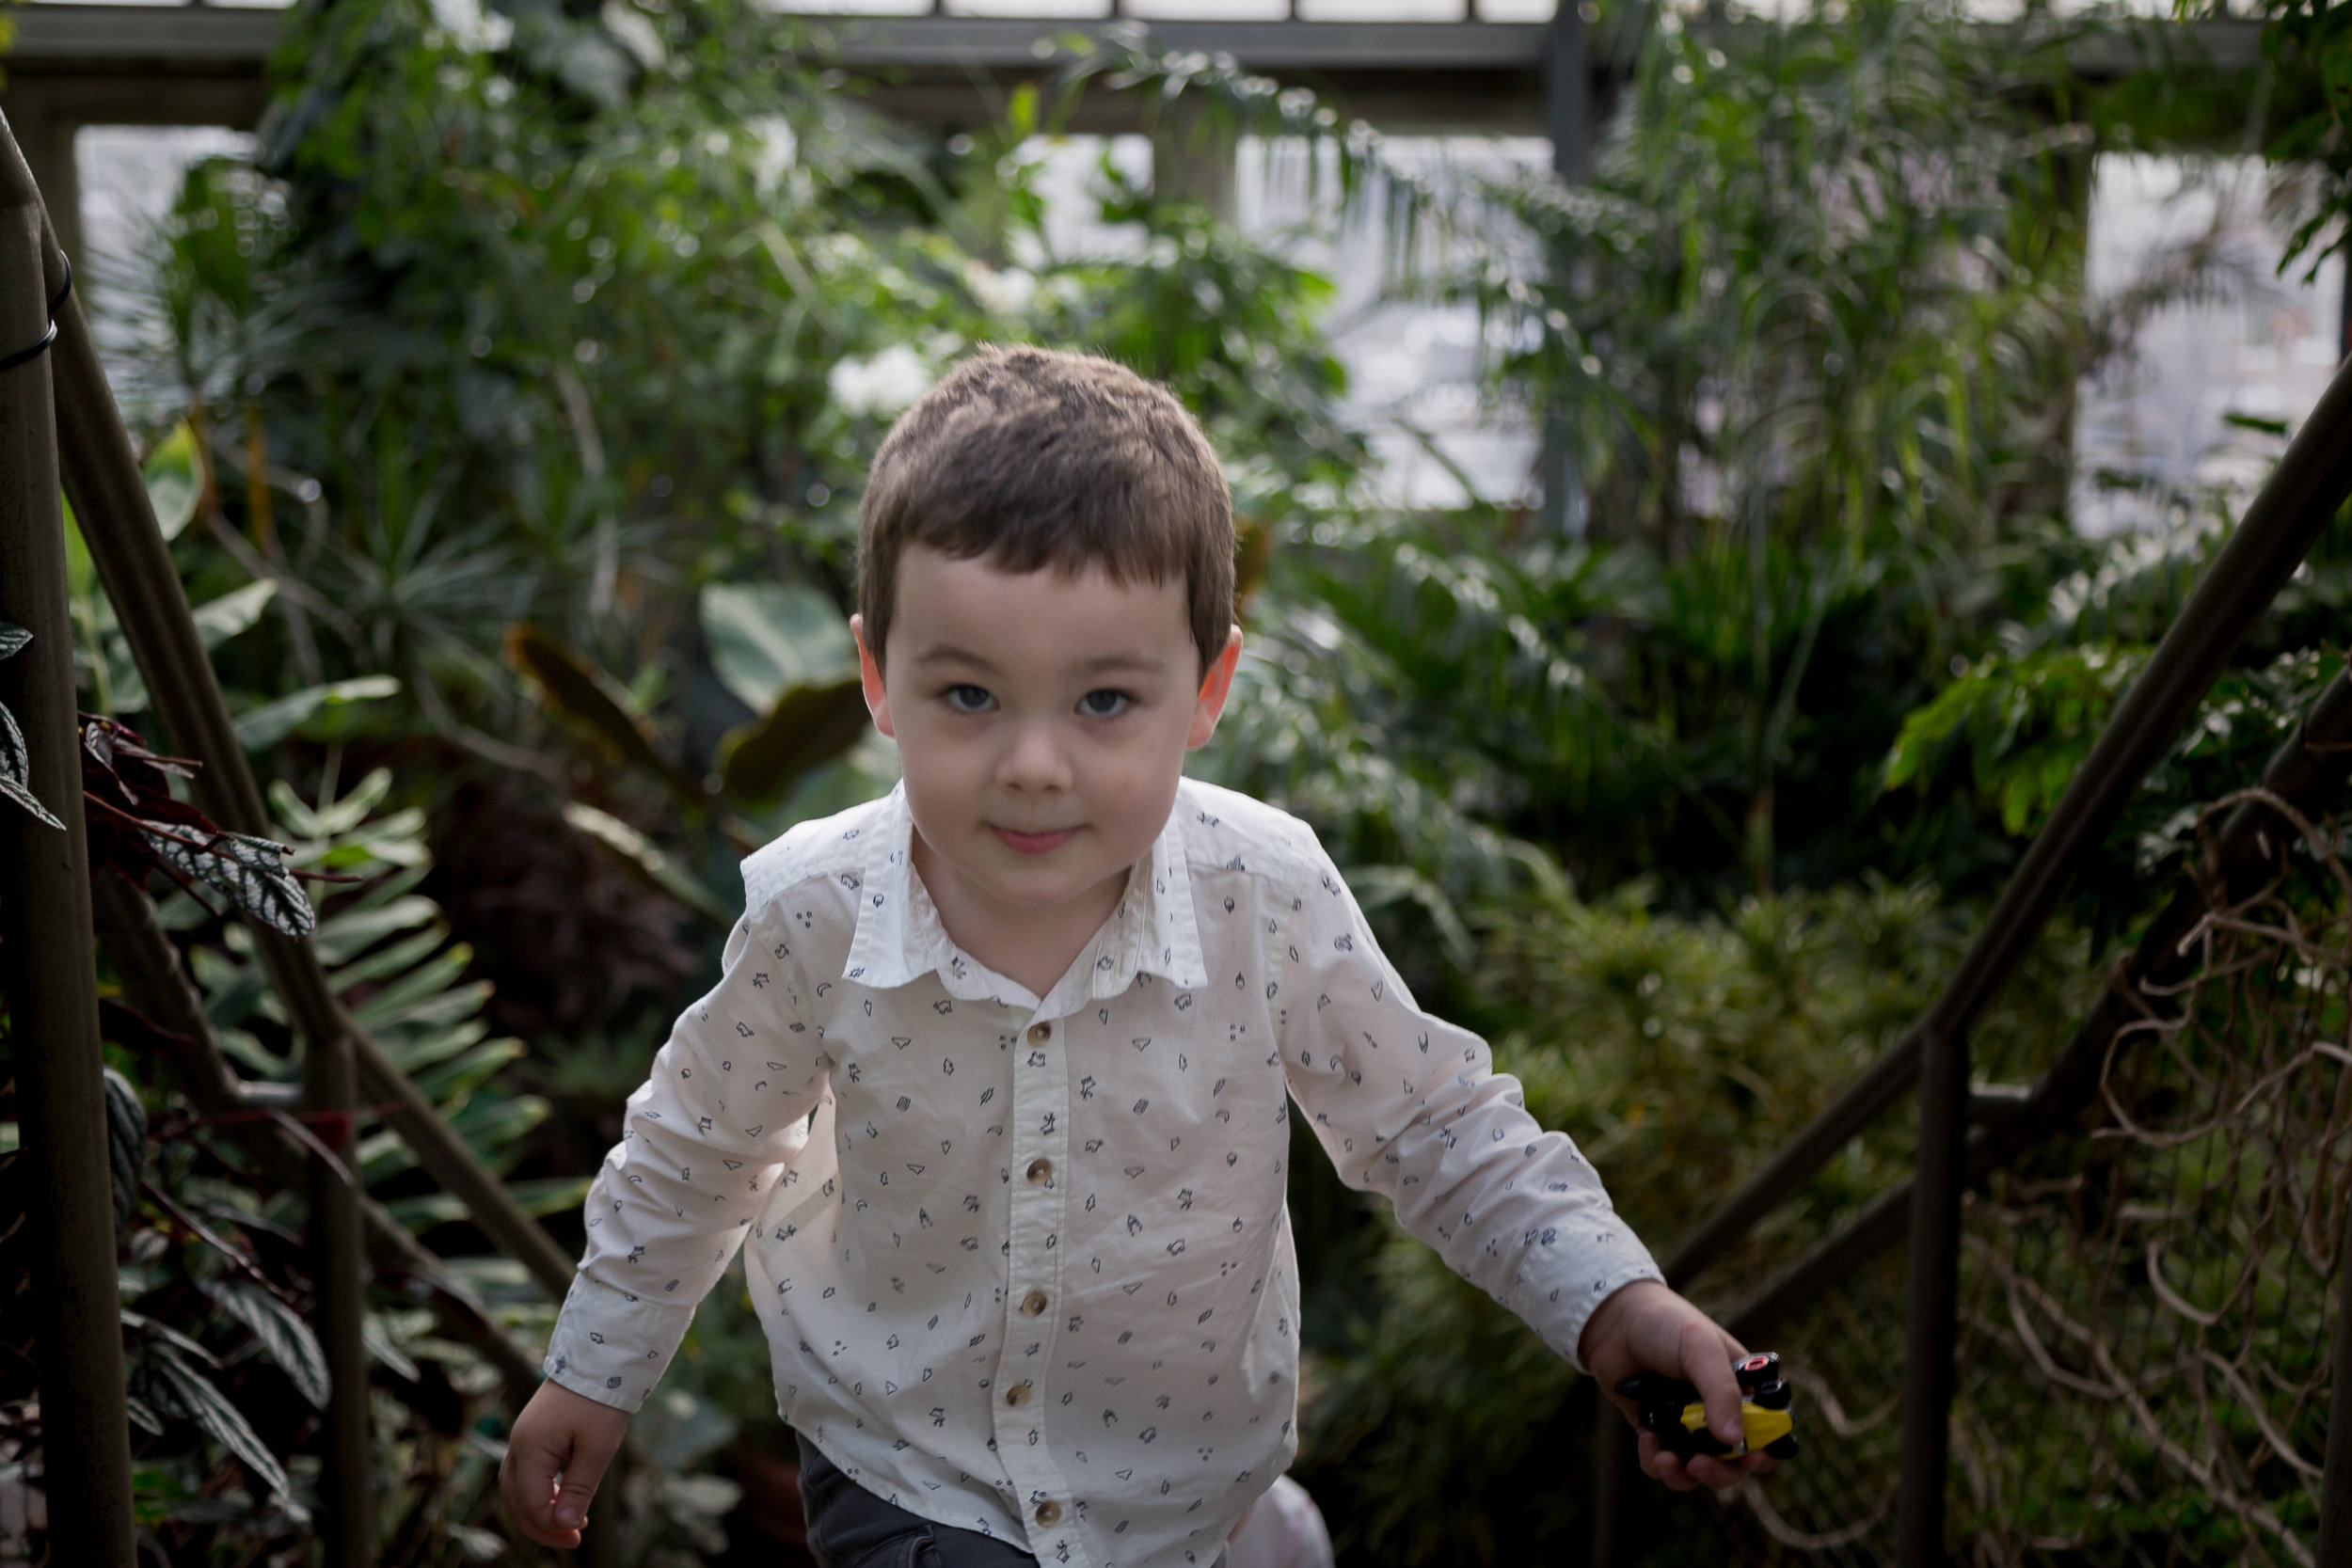 Chicago_Photographer_Garfield_Park_Conservatory_Family_Holiday-11.jpg